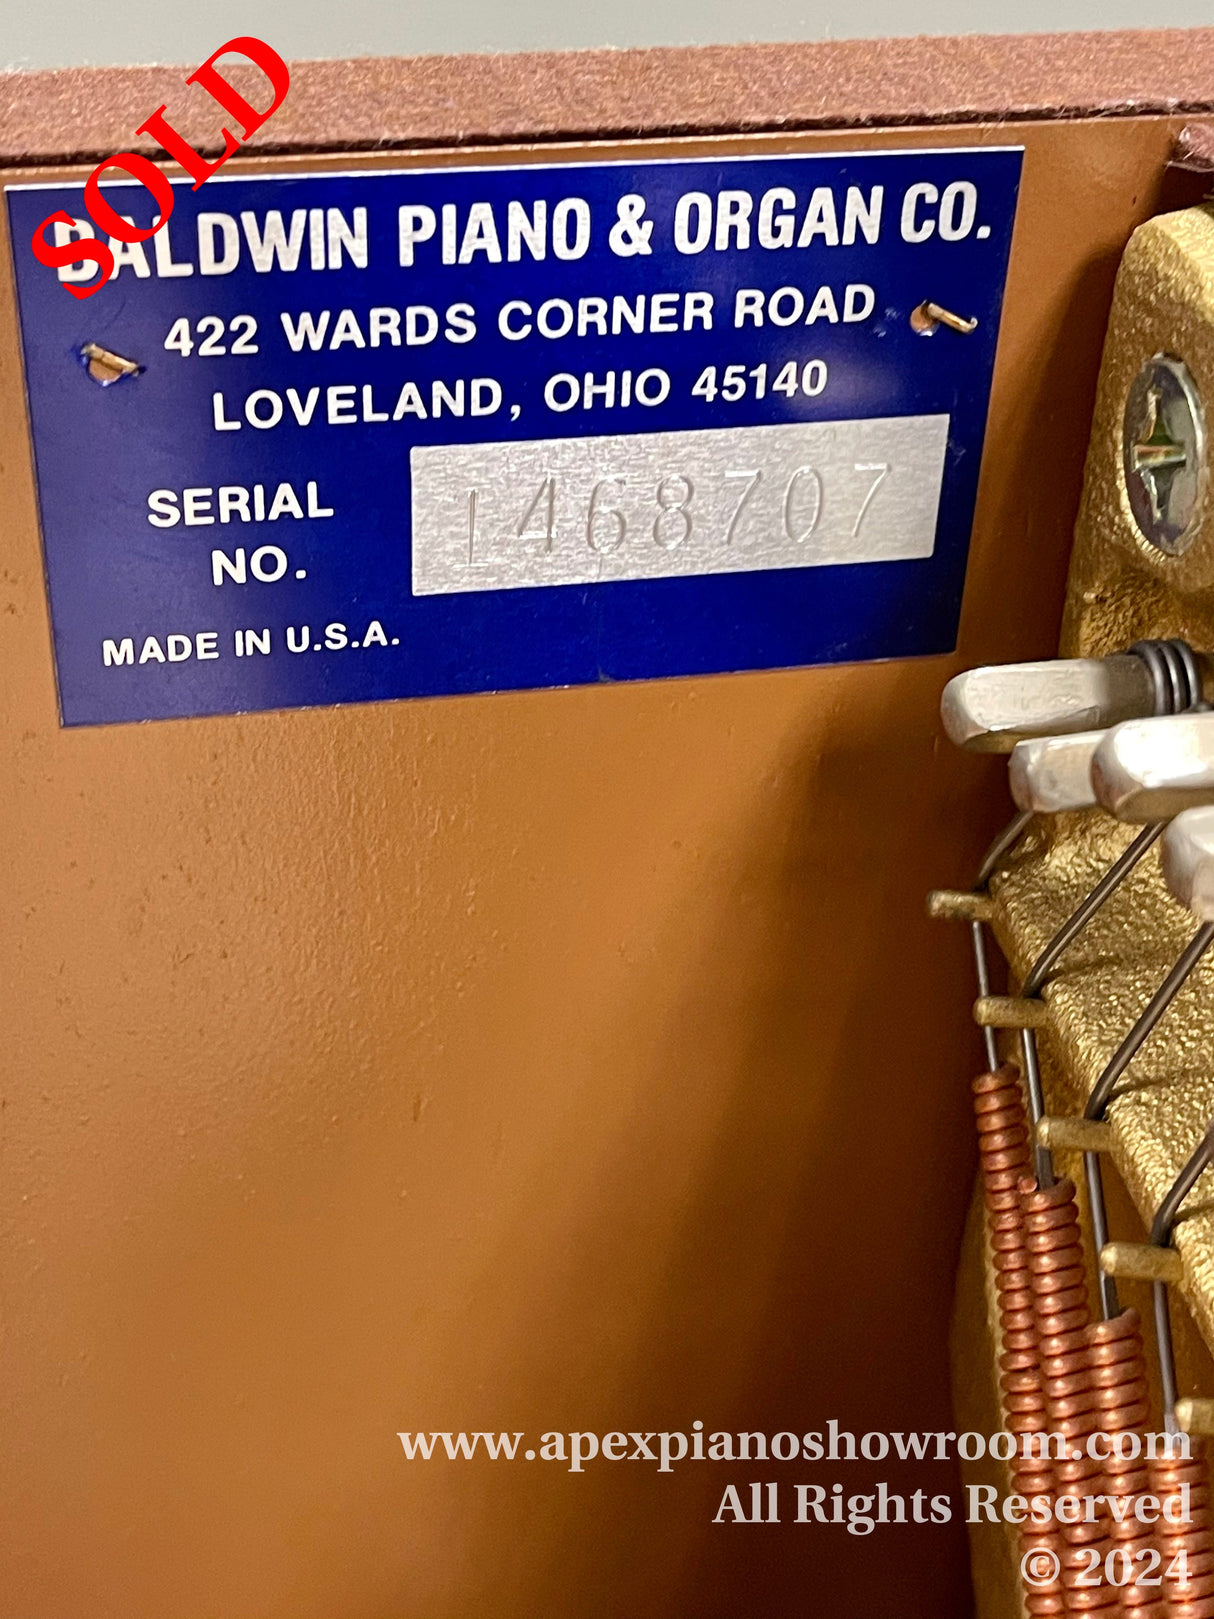 Manufacturer's information plate on a Baldwin piano indicating it is made by the Baldwin Piano & Organ Co., located in Loveland, Ohio, with the serial number 1468707, made in the U.S.A.